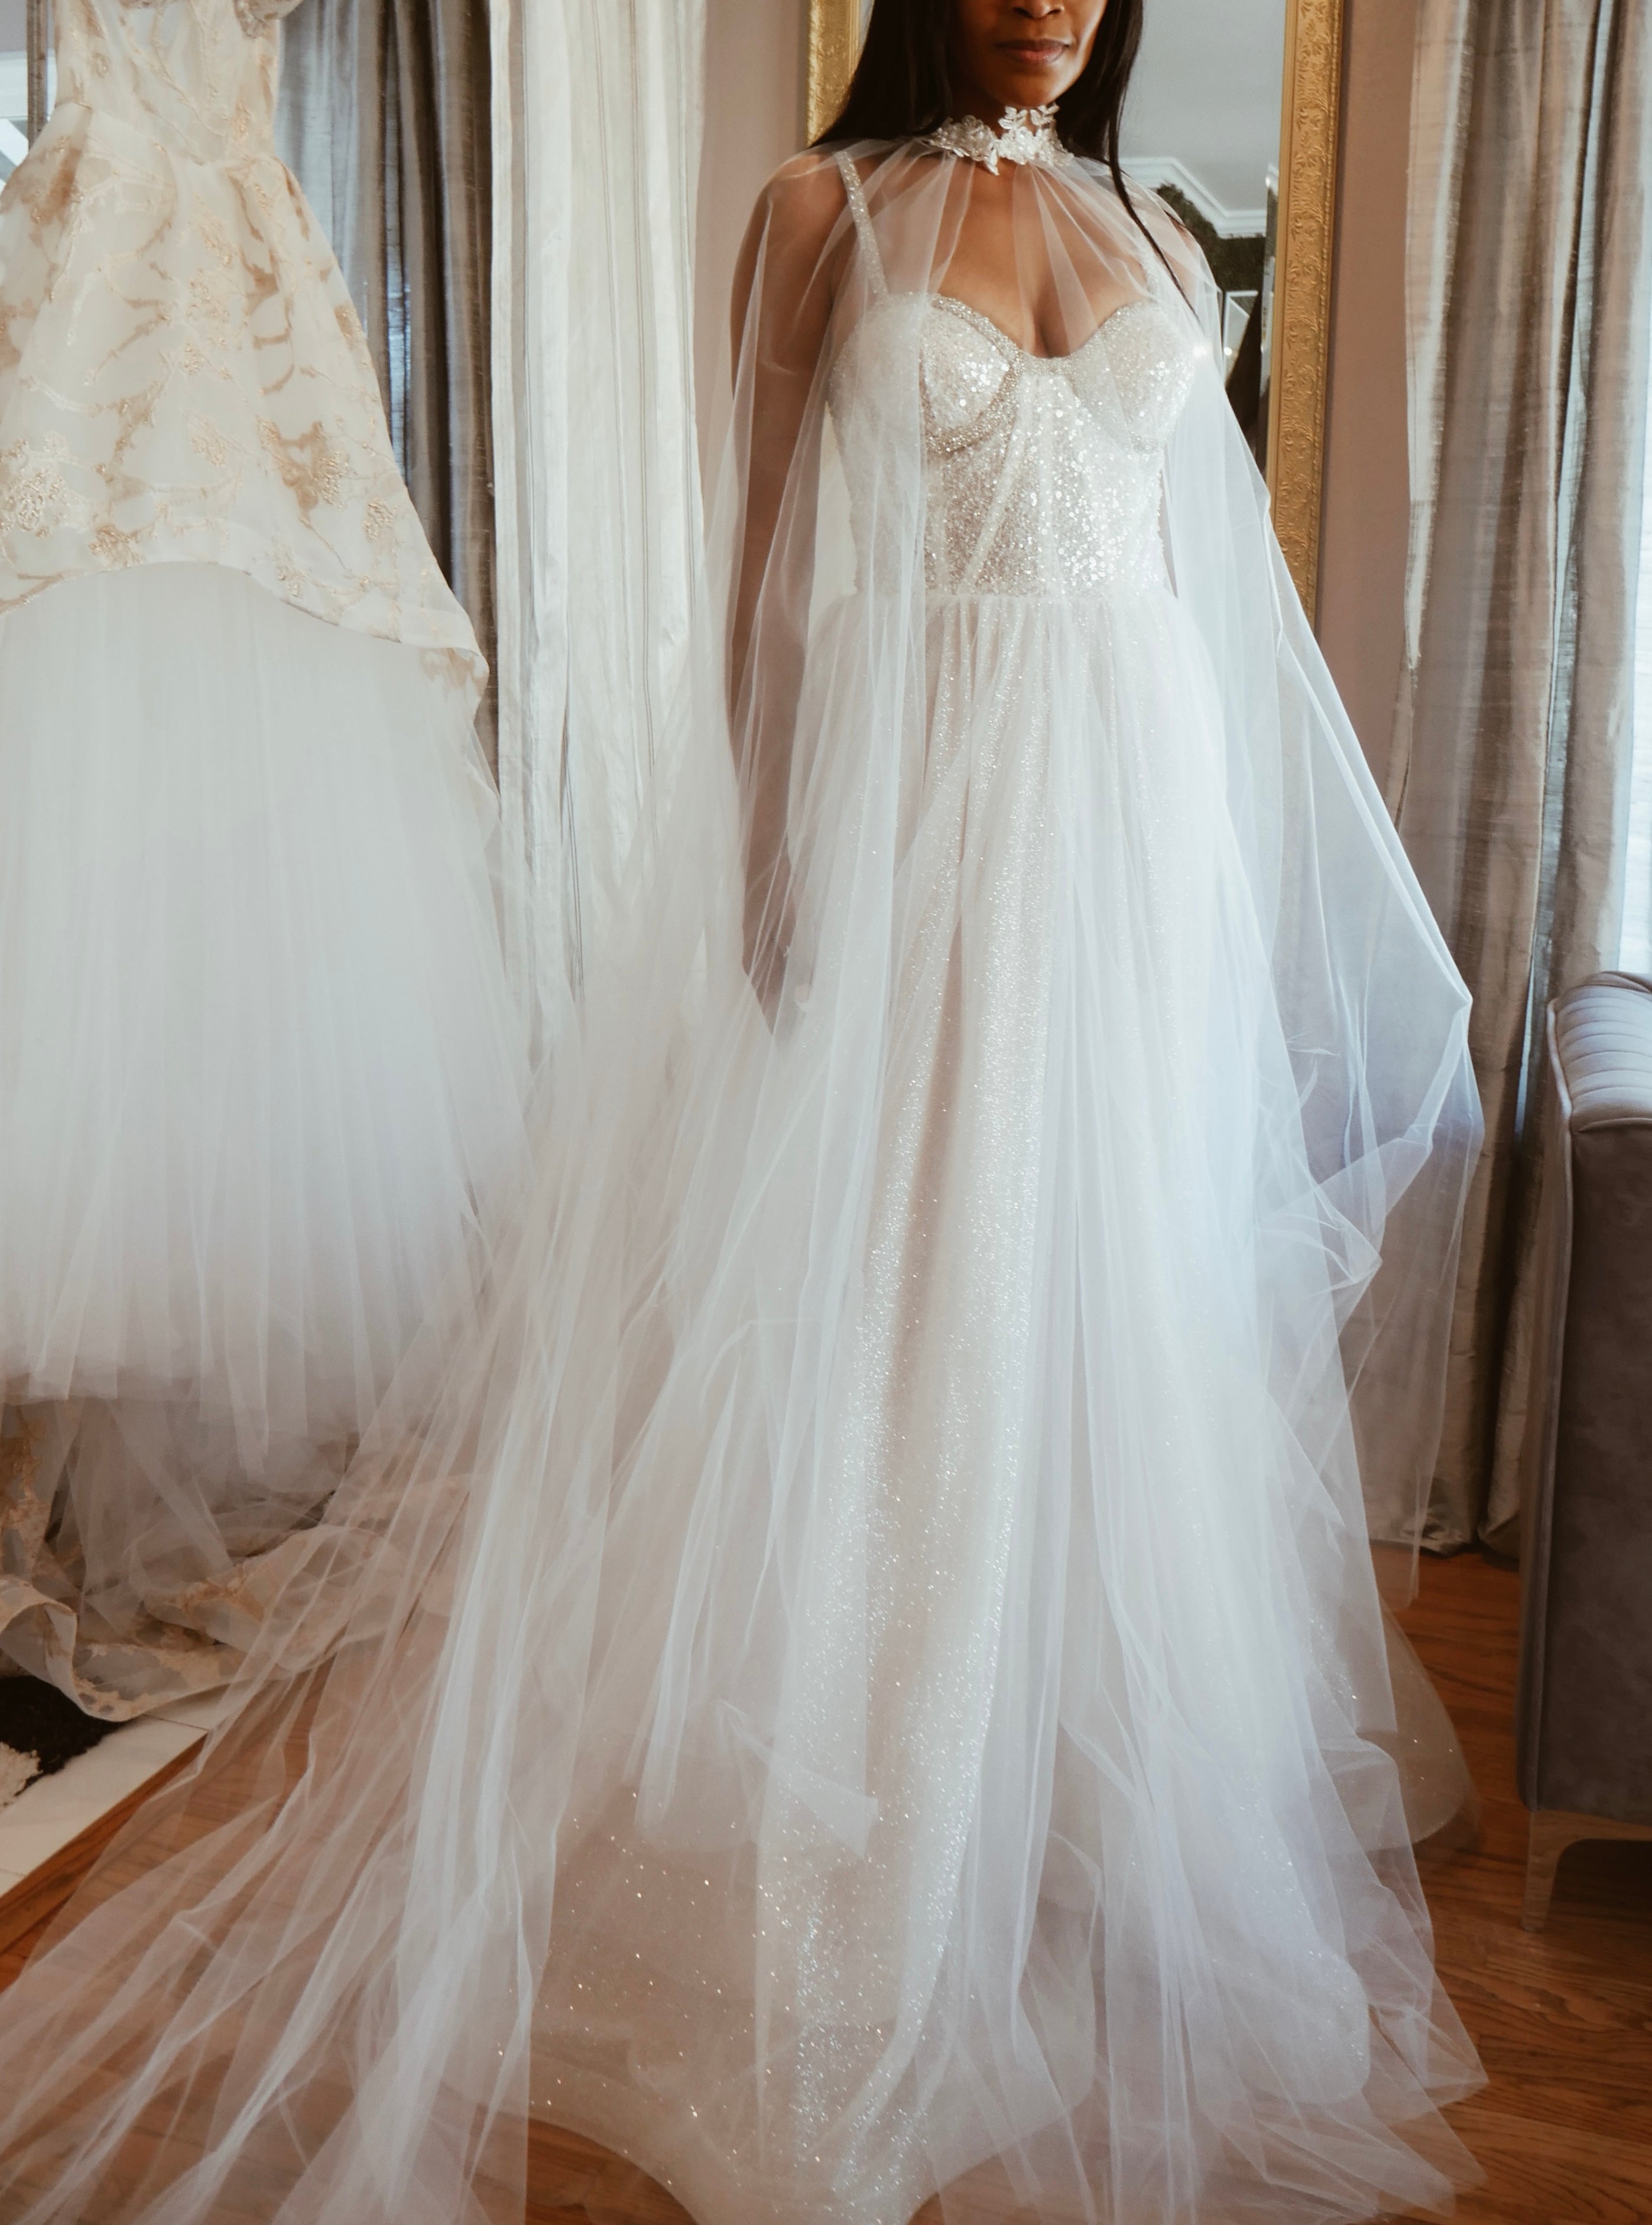 Vale Tulle Bridal Cape with Lace applique flower collar